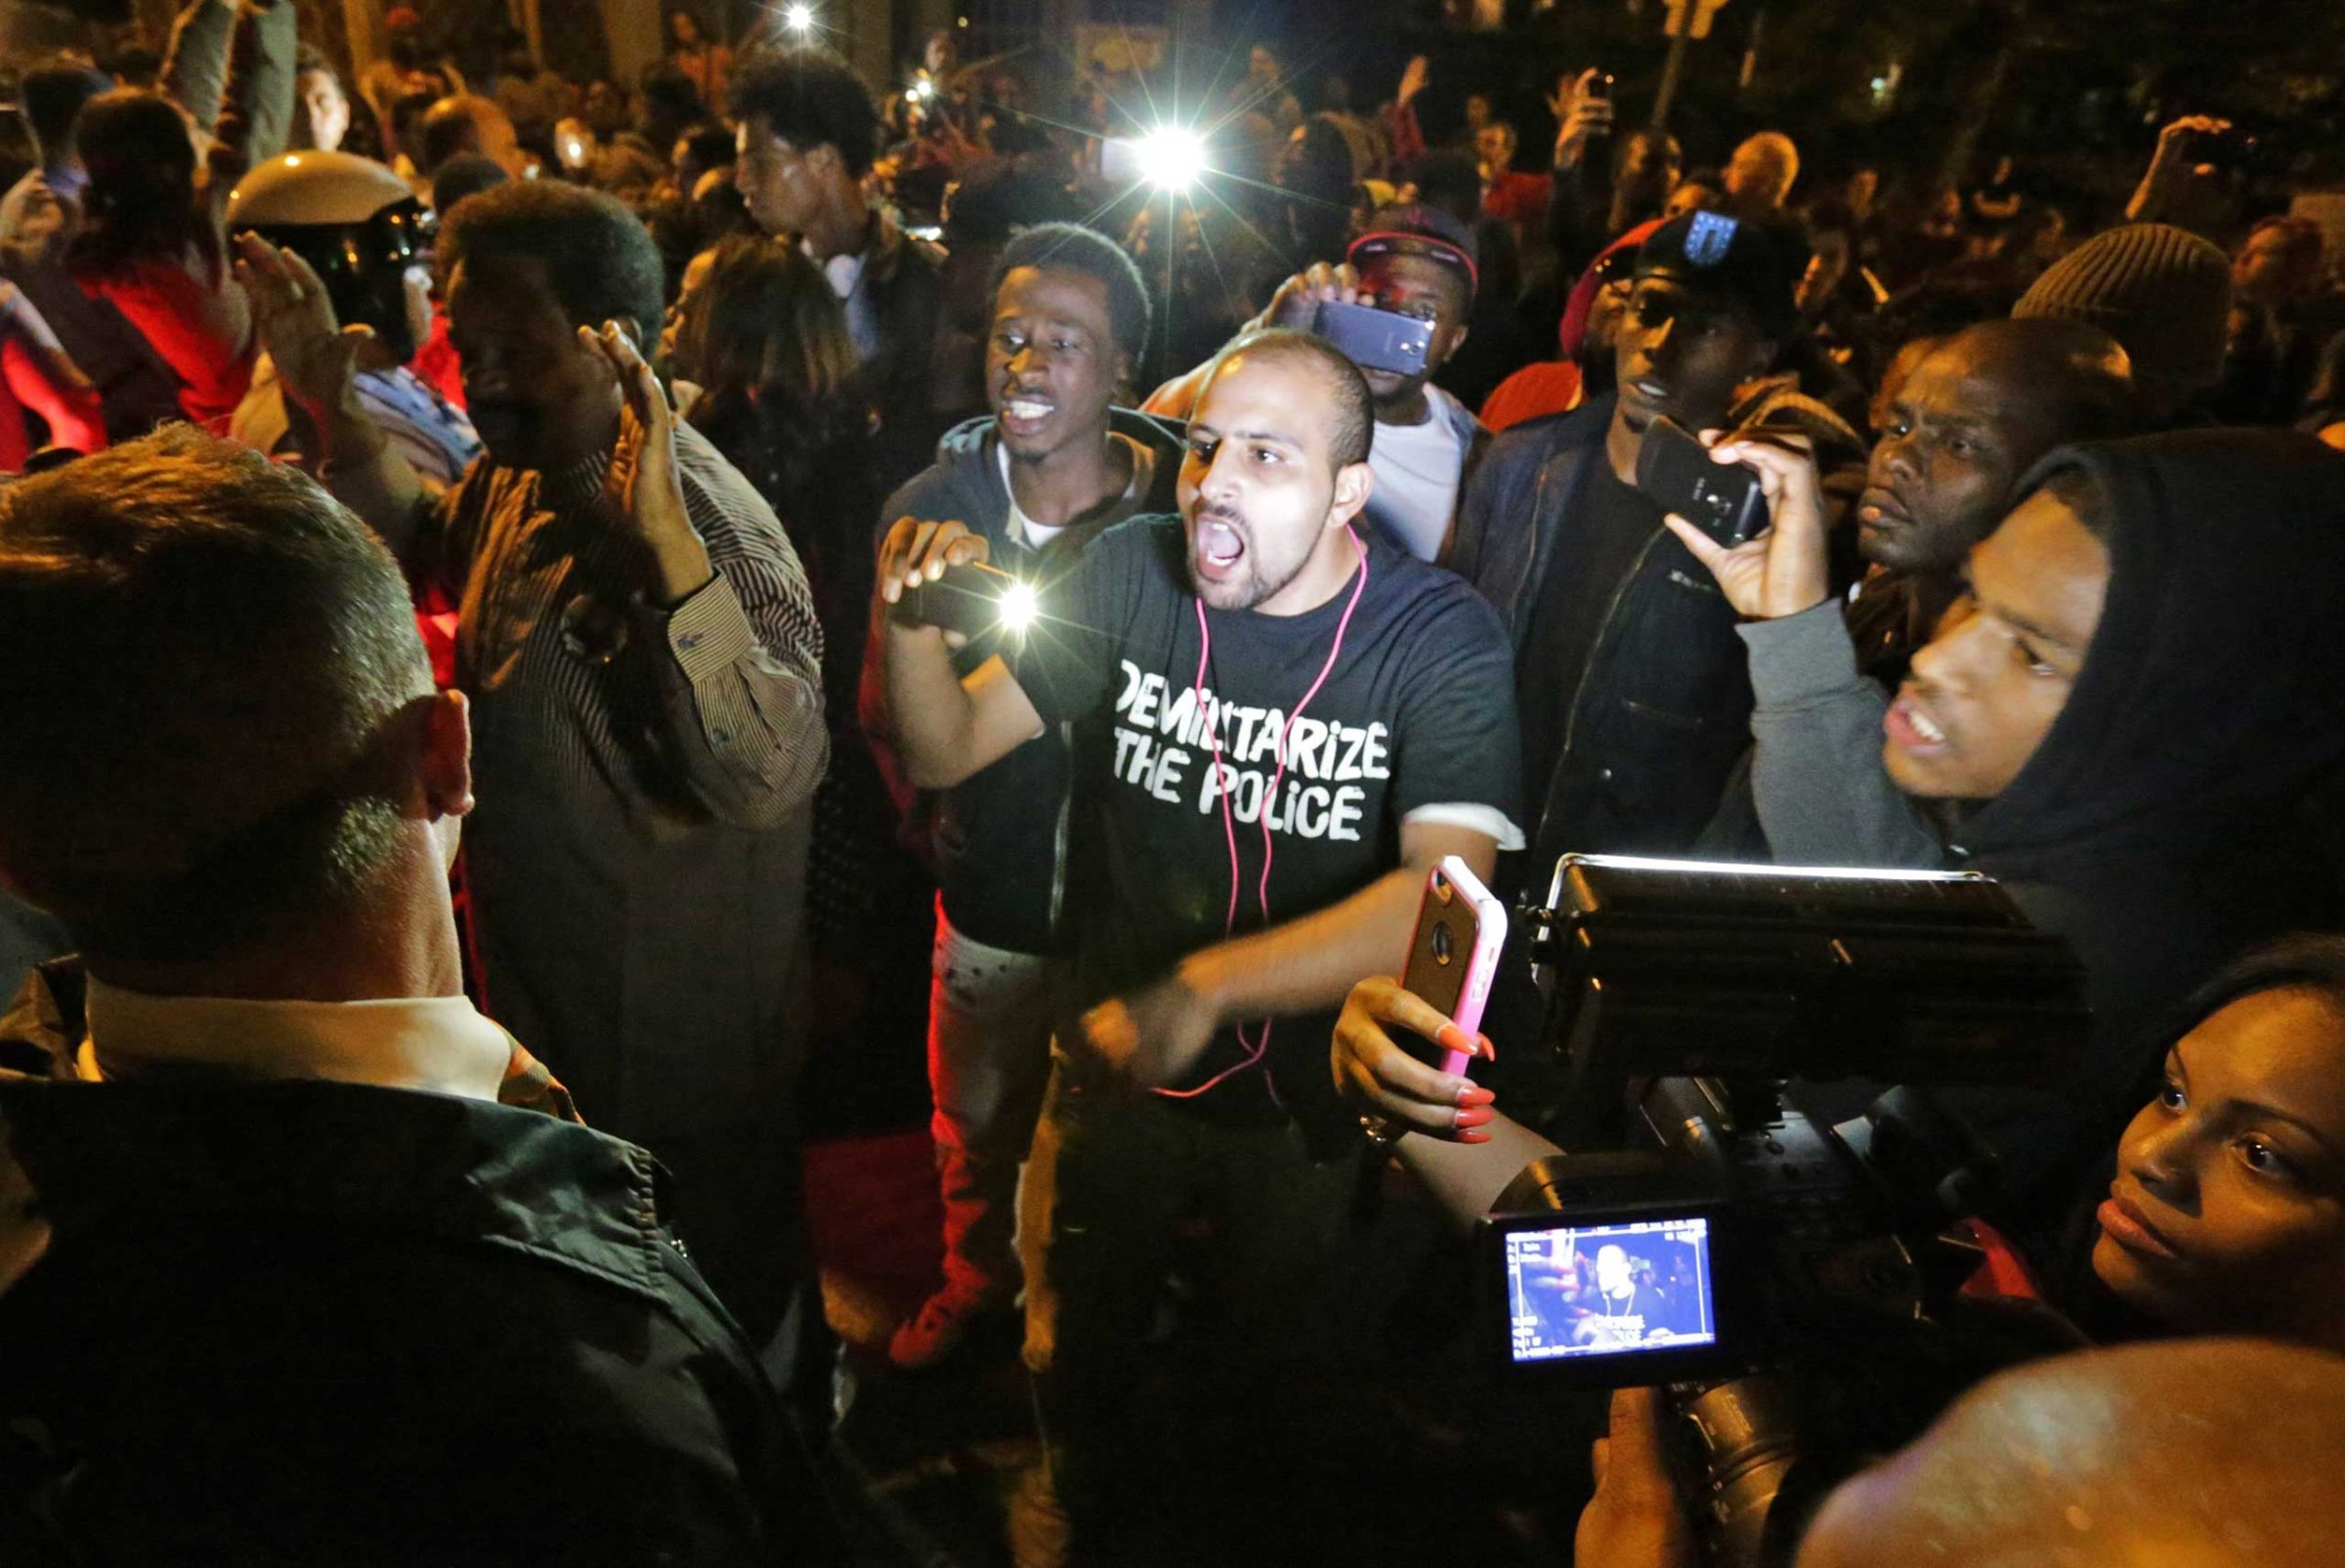 Crowds confront police near the scene in in south St. Louis where a man was fatally shot by an off-duty St. Louis police officer on Oct. 8, 2014. St. Louis.